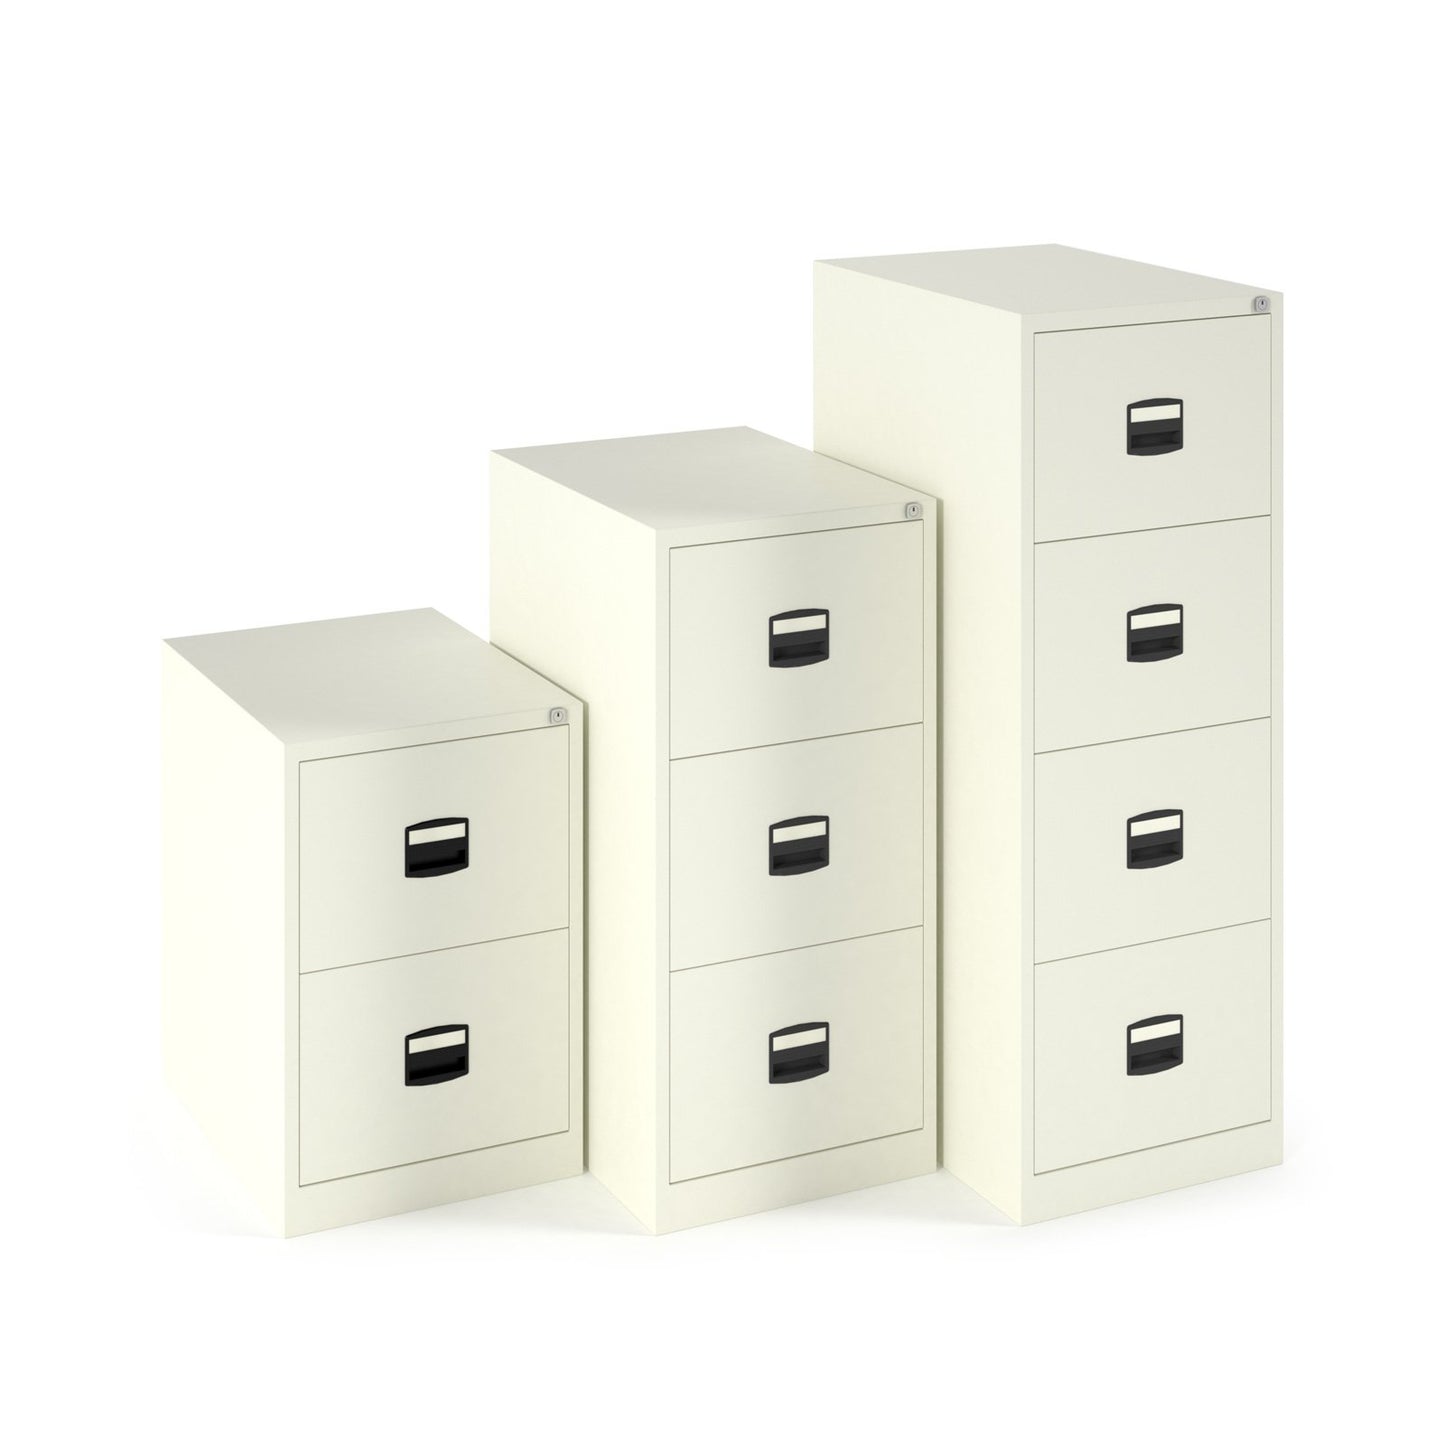 Steel Contract Filing Cabinet - 2 Drawer - White